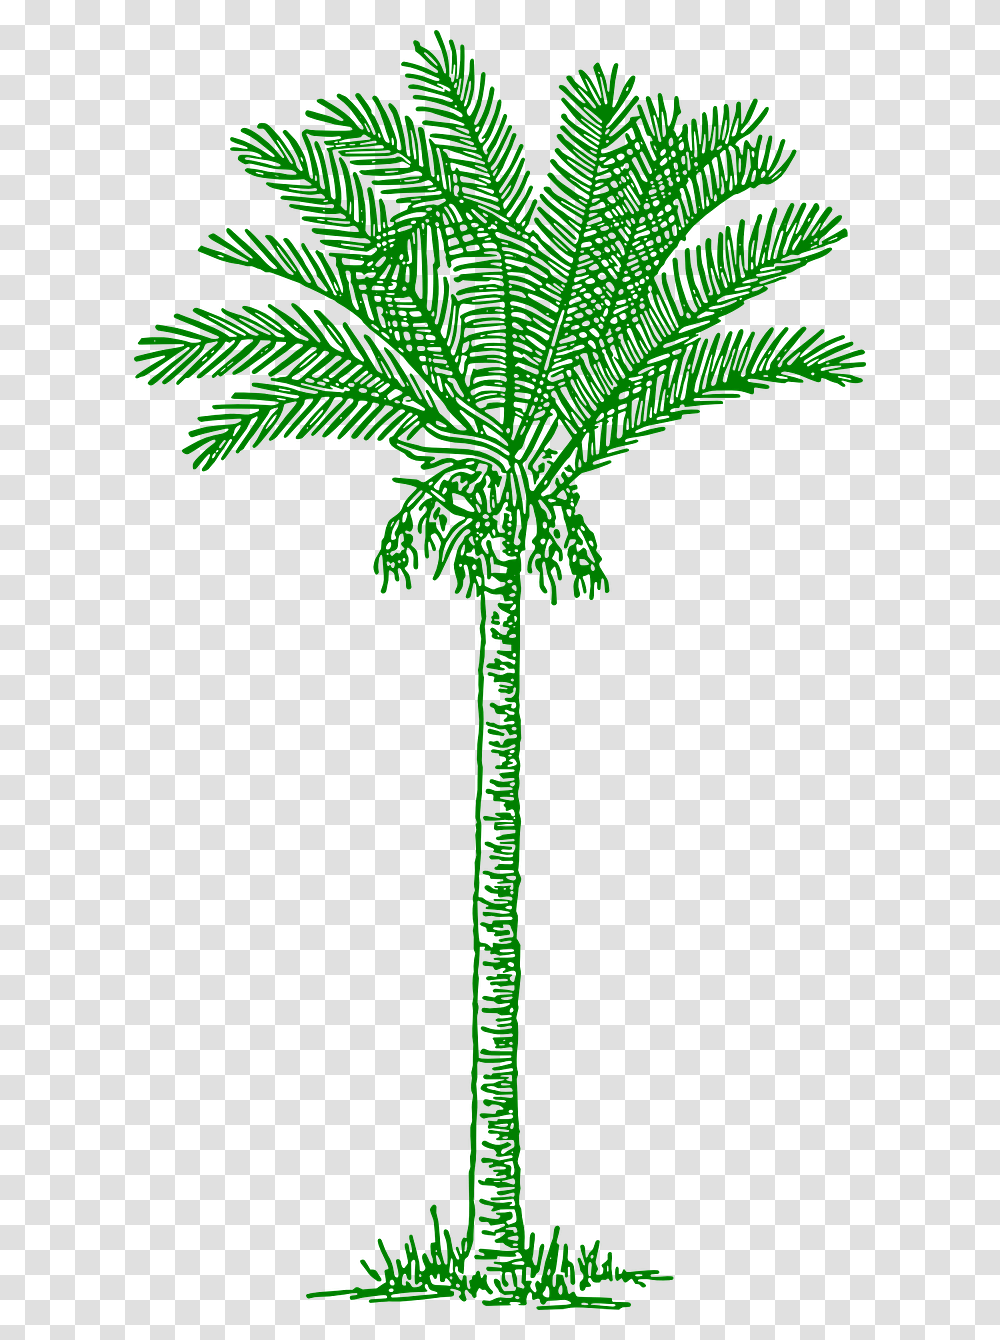 Tree Clipart V Shaped Date Palm Tree Drawing, Plant, Cross, Leaf Transparent Png